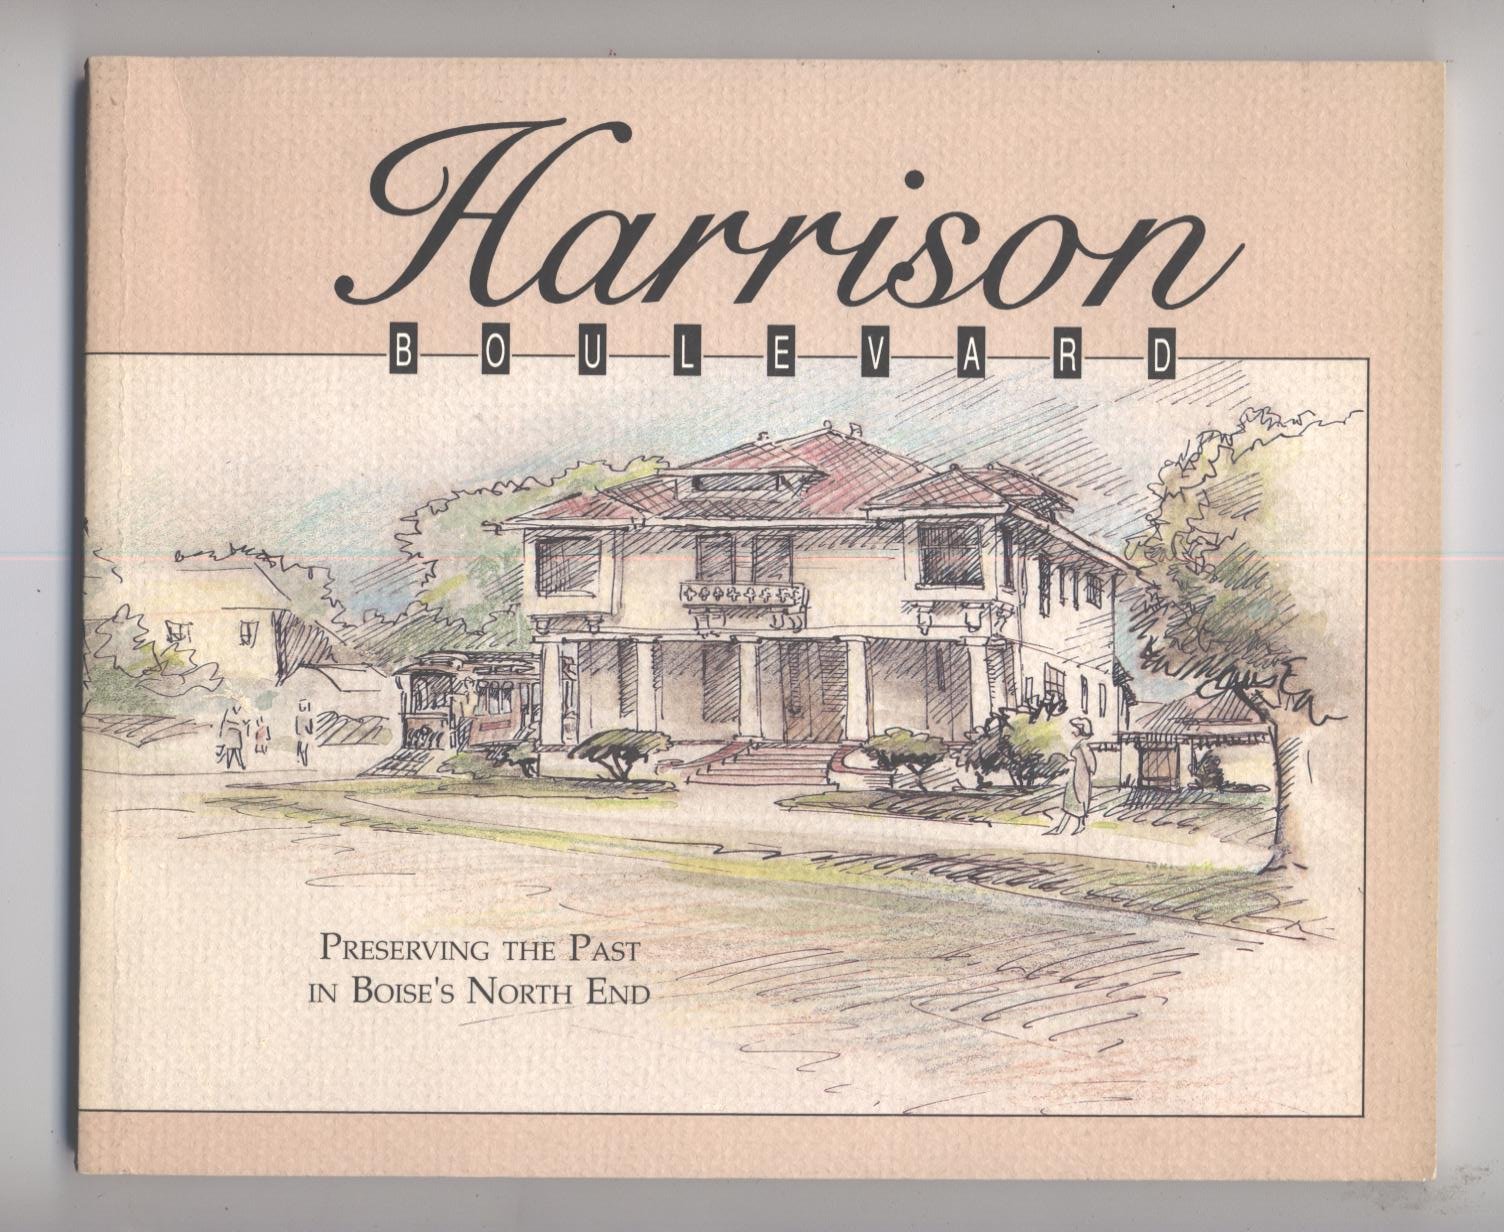 Harrison Boulevard: Preserving the past in Boise's North End (book cover)